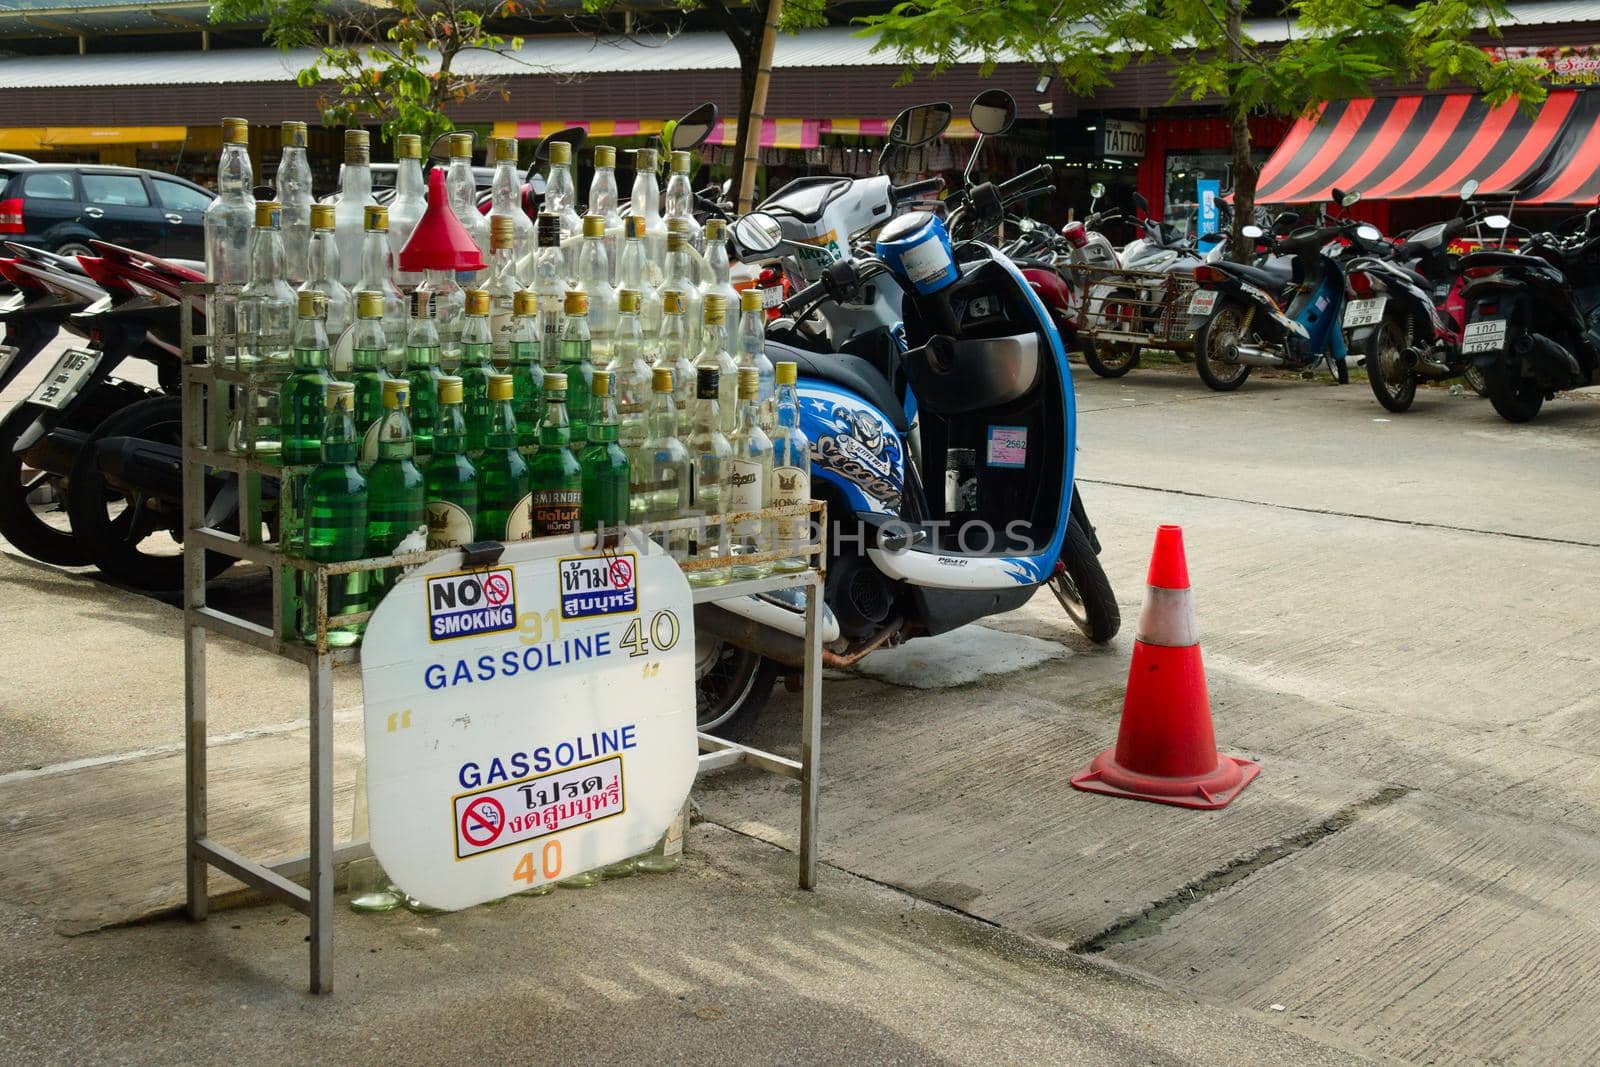 2019-11-05 / Phuket, Thailand - Bottles of gasoline for sale in a motorcycle rental stand.